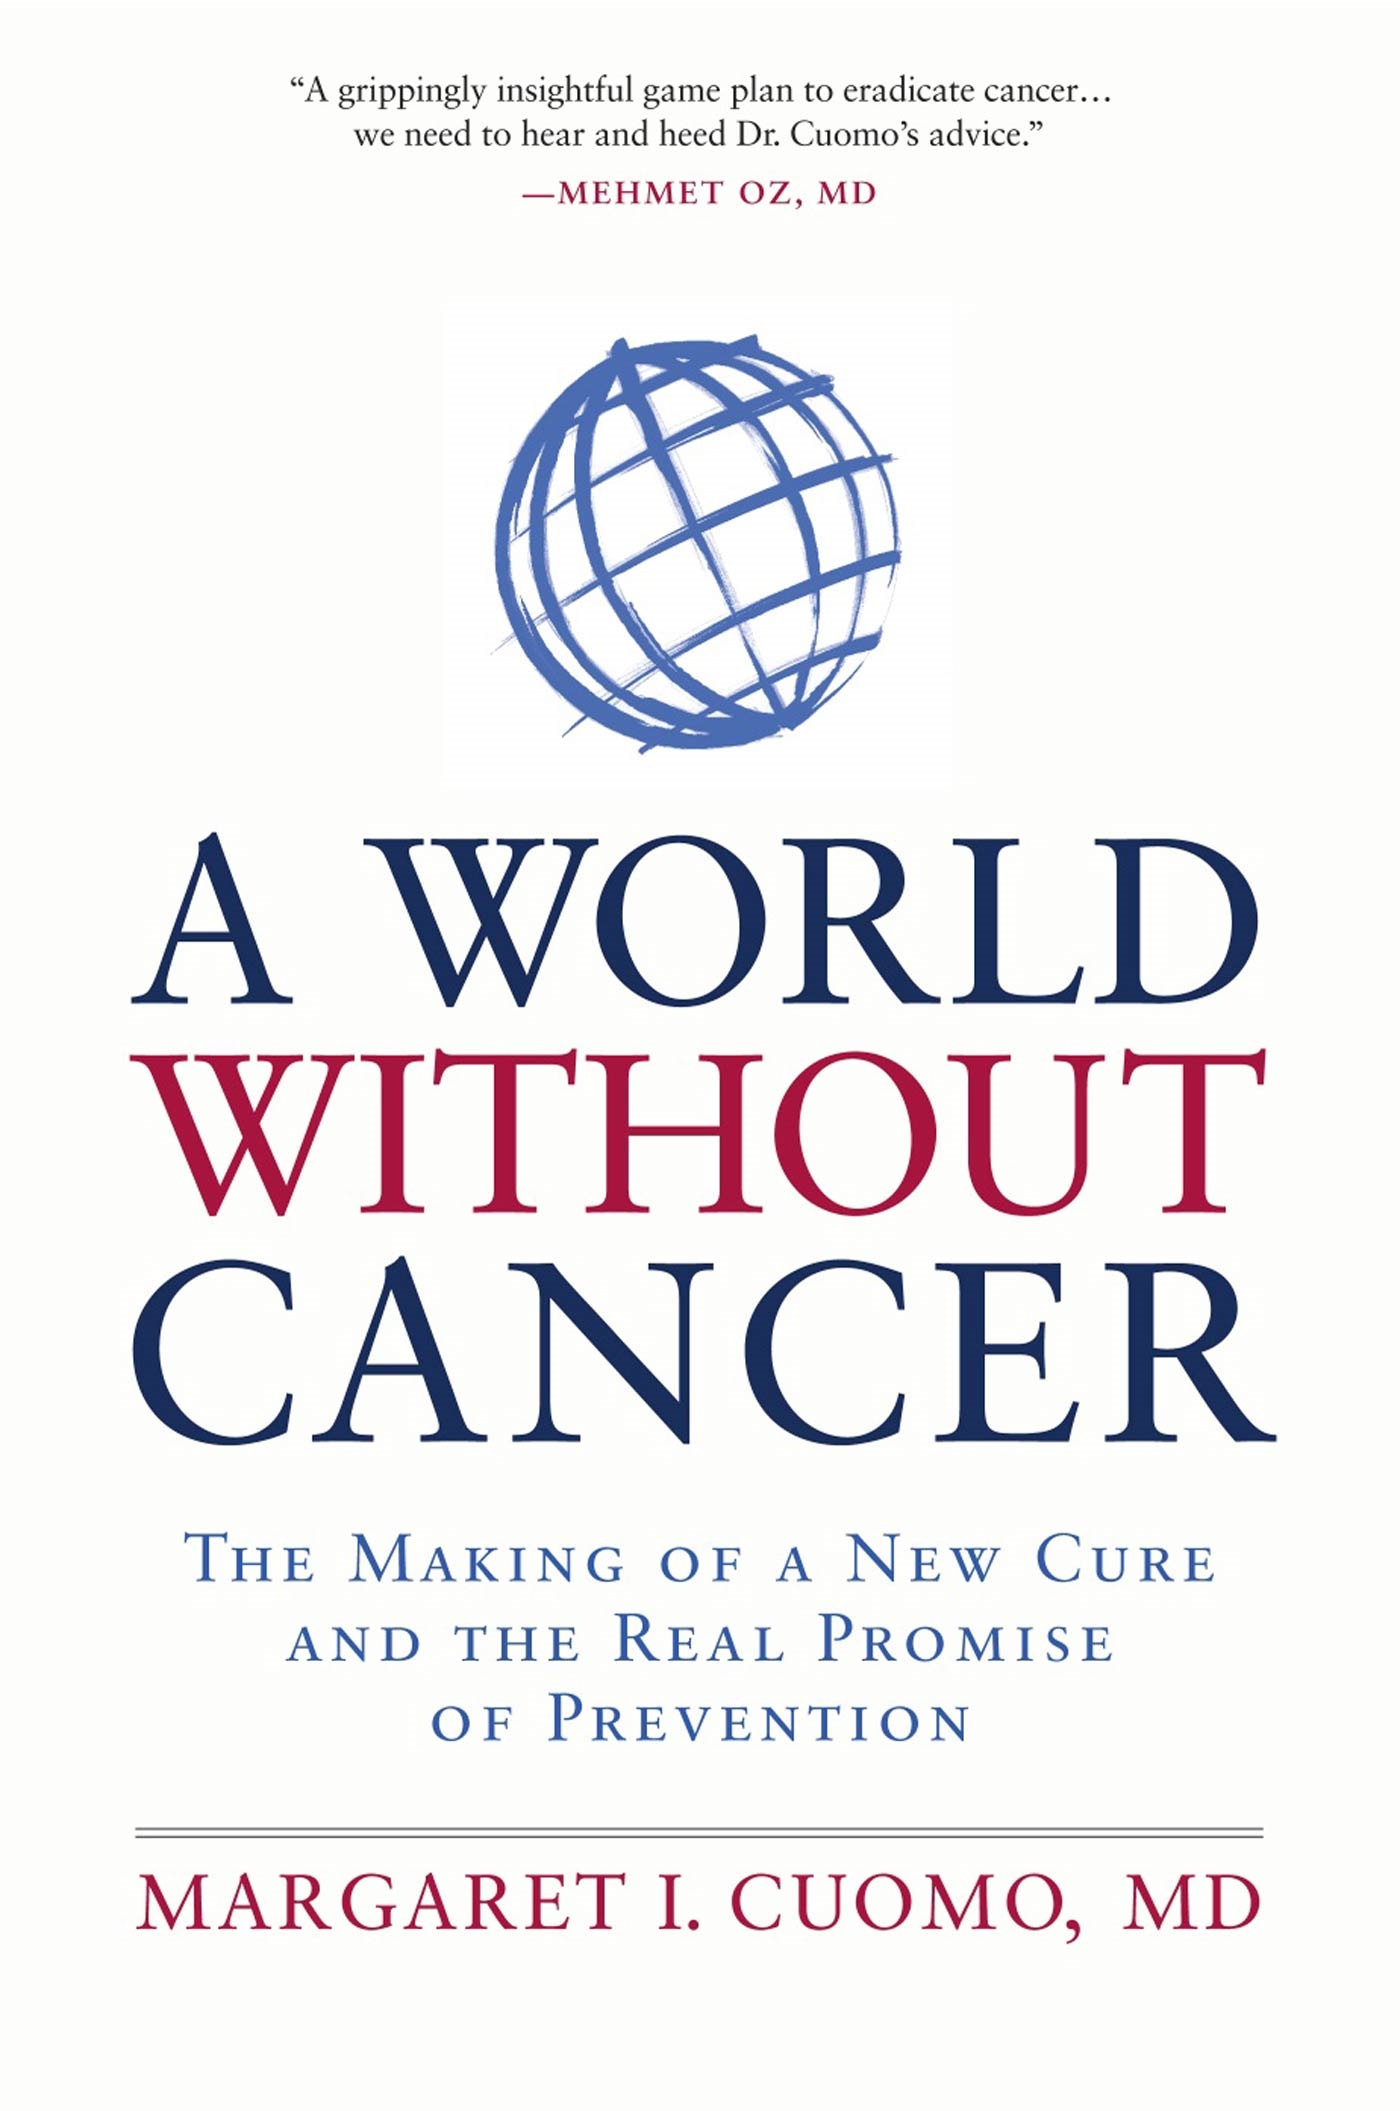 A World Without Cancer : The Making of a New Cure and the Real Promise of Prevention (Hardcover) - image 1 of 1